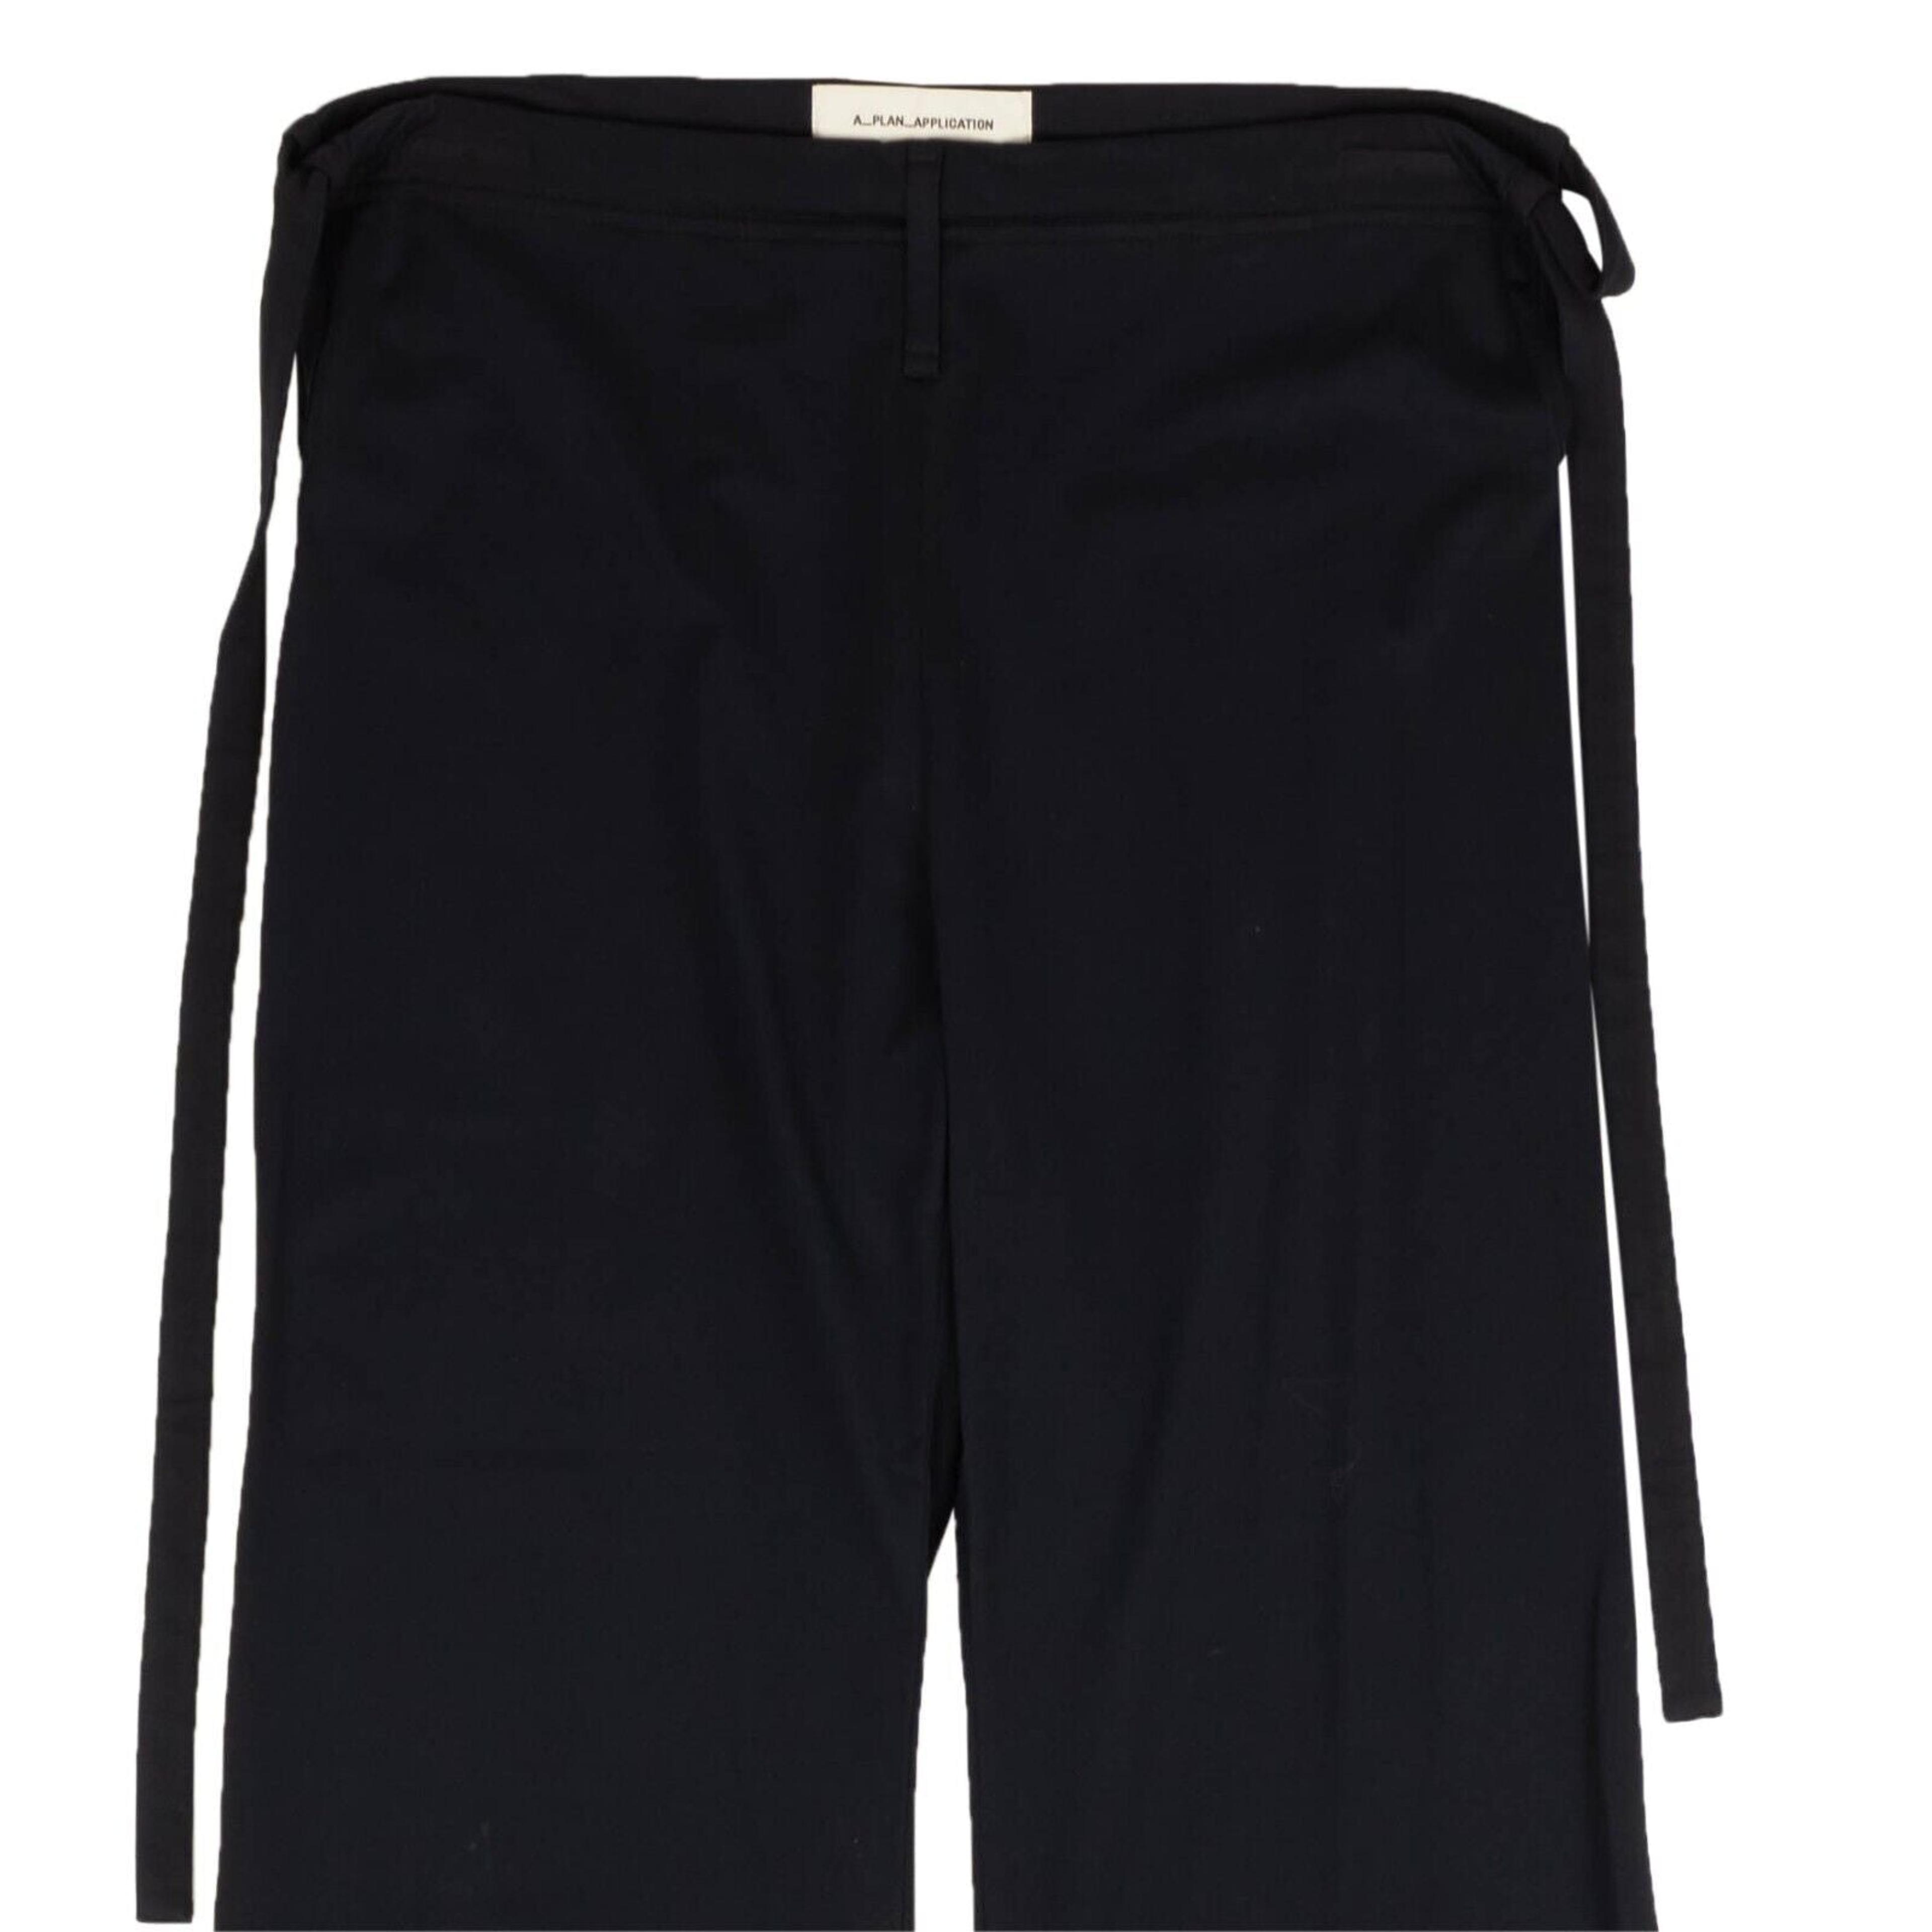 Alternate View 1 of A.P.C Pants - Navy Blue